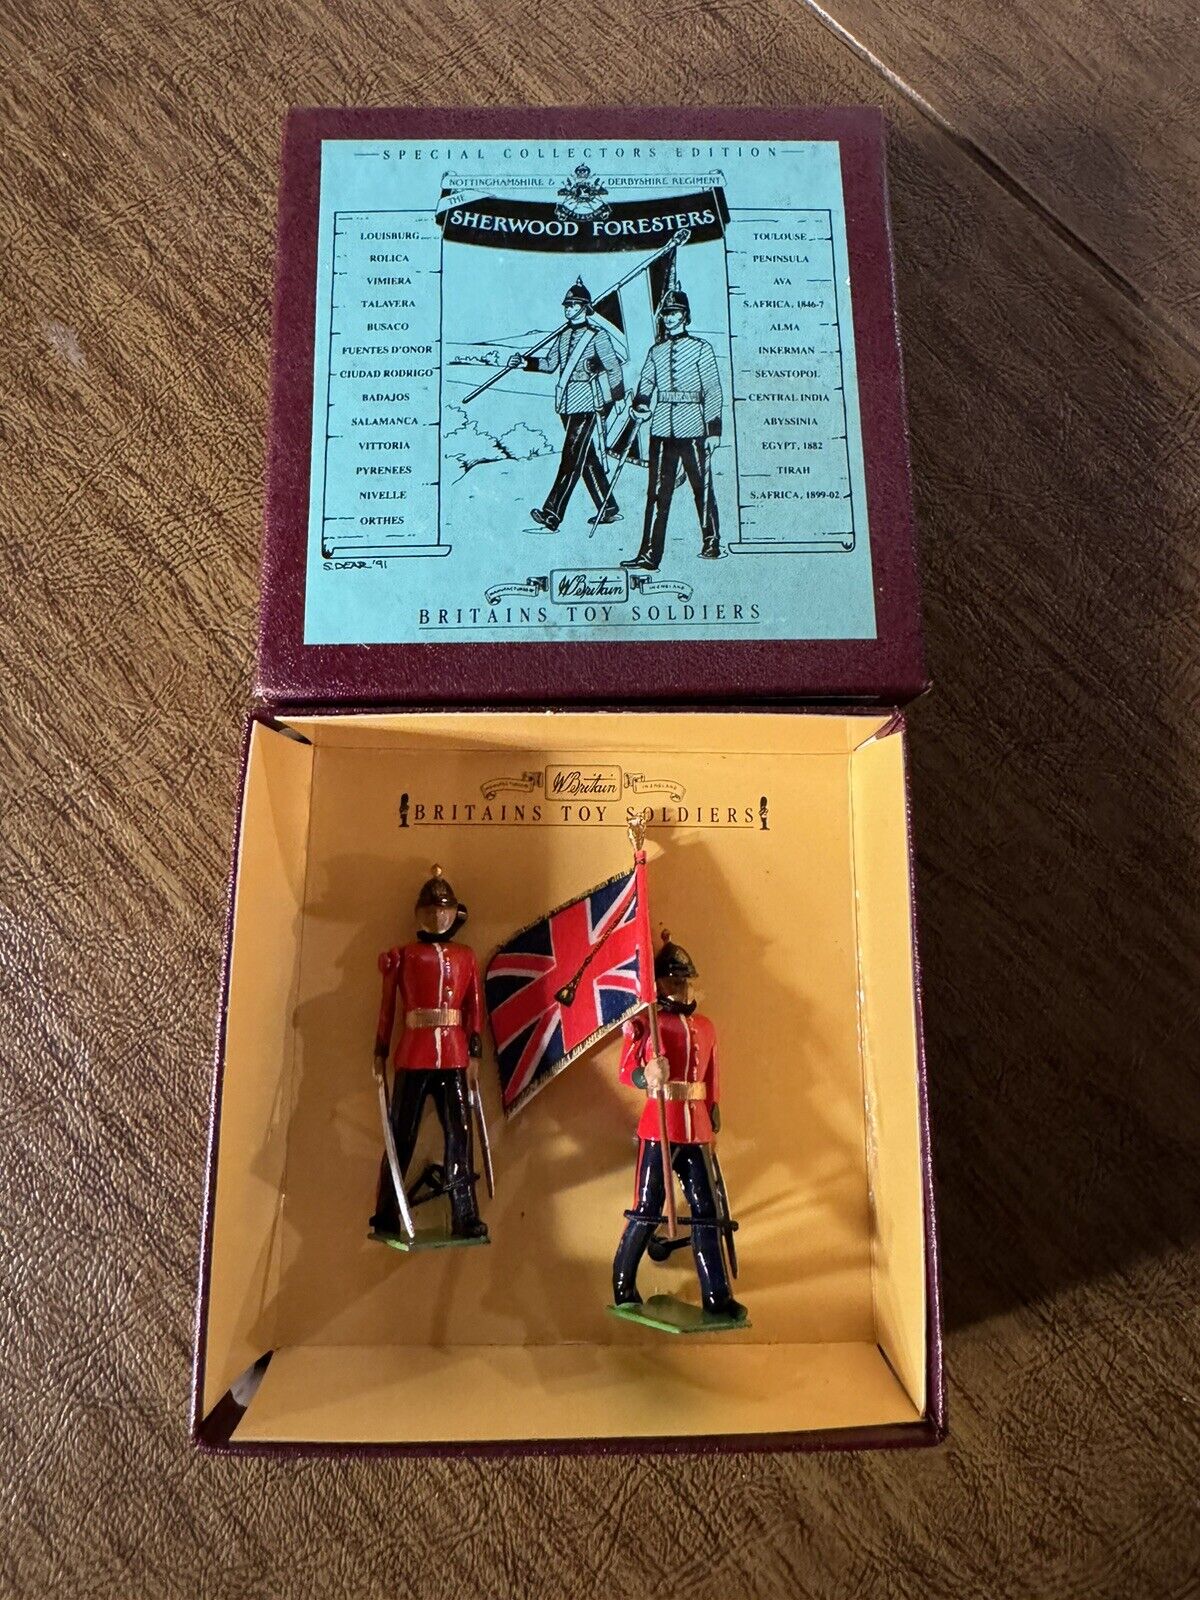 Britains Toy Soldiers Sherwood Foresters Special Collectors Edition 8818 Mint.